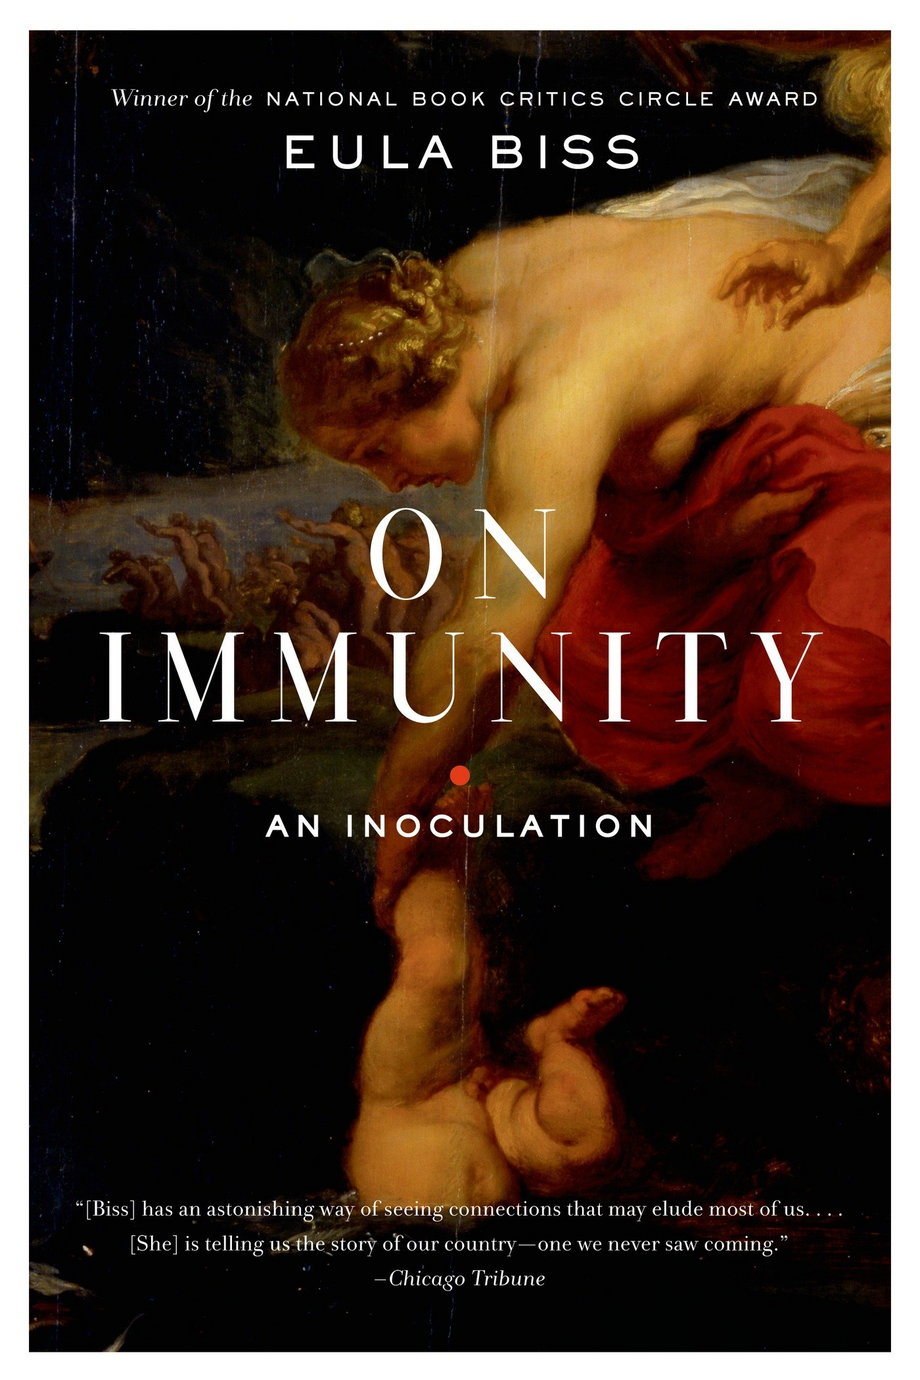 'On Immunity' by Eula Biss